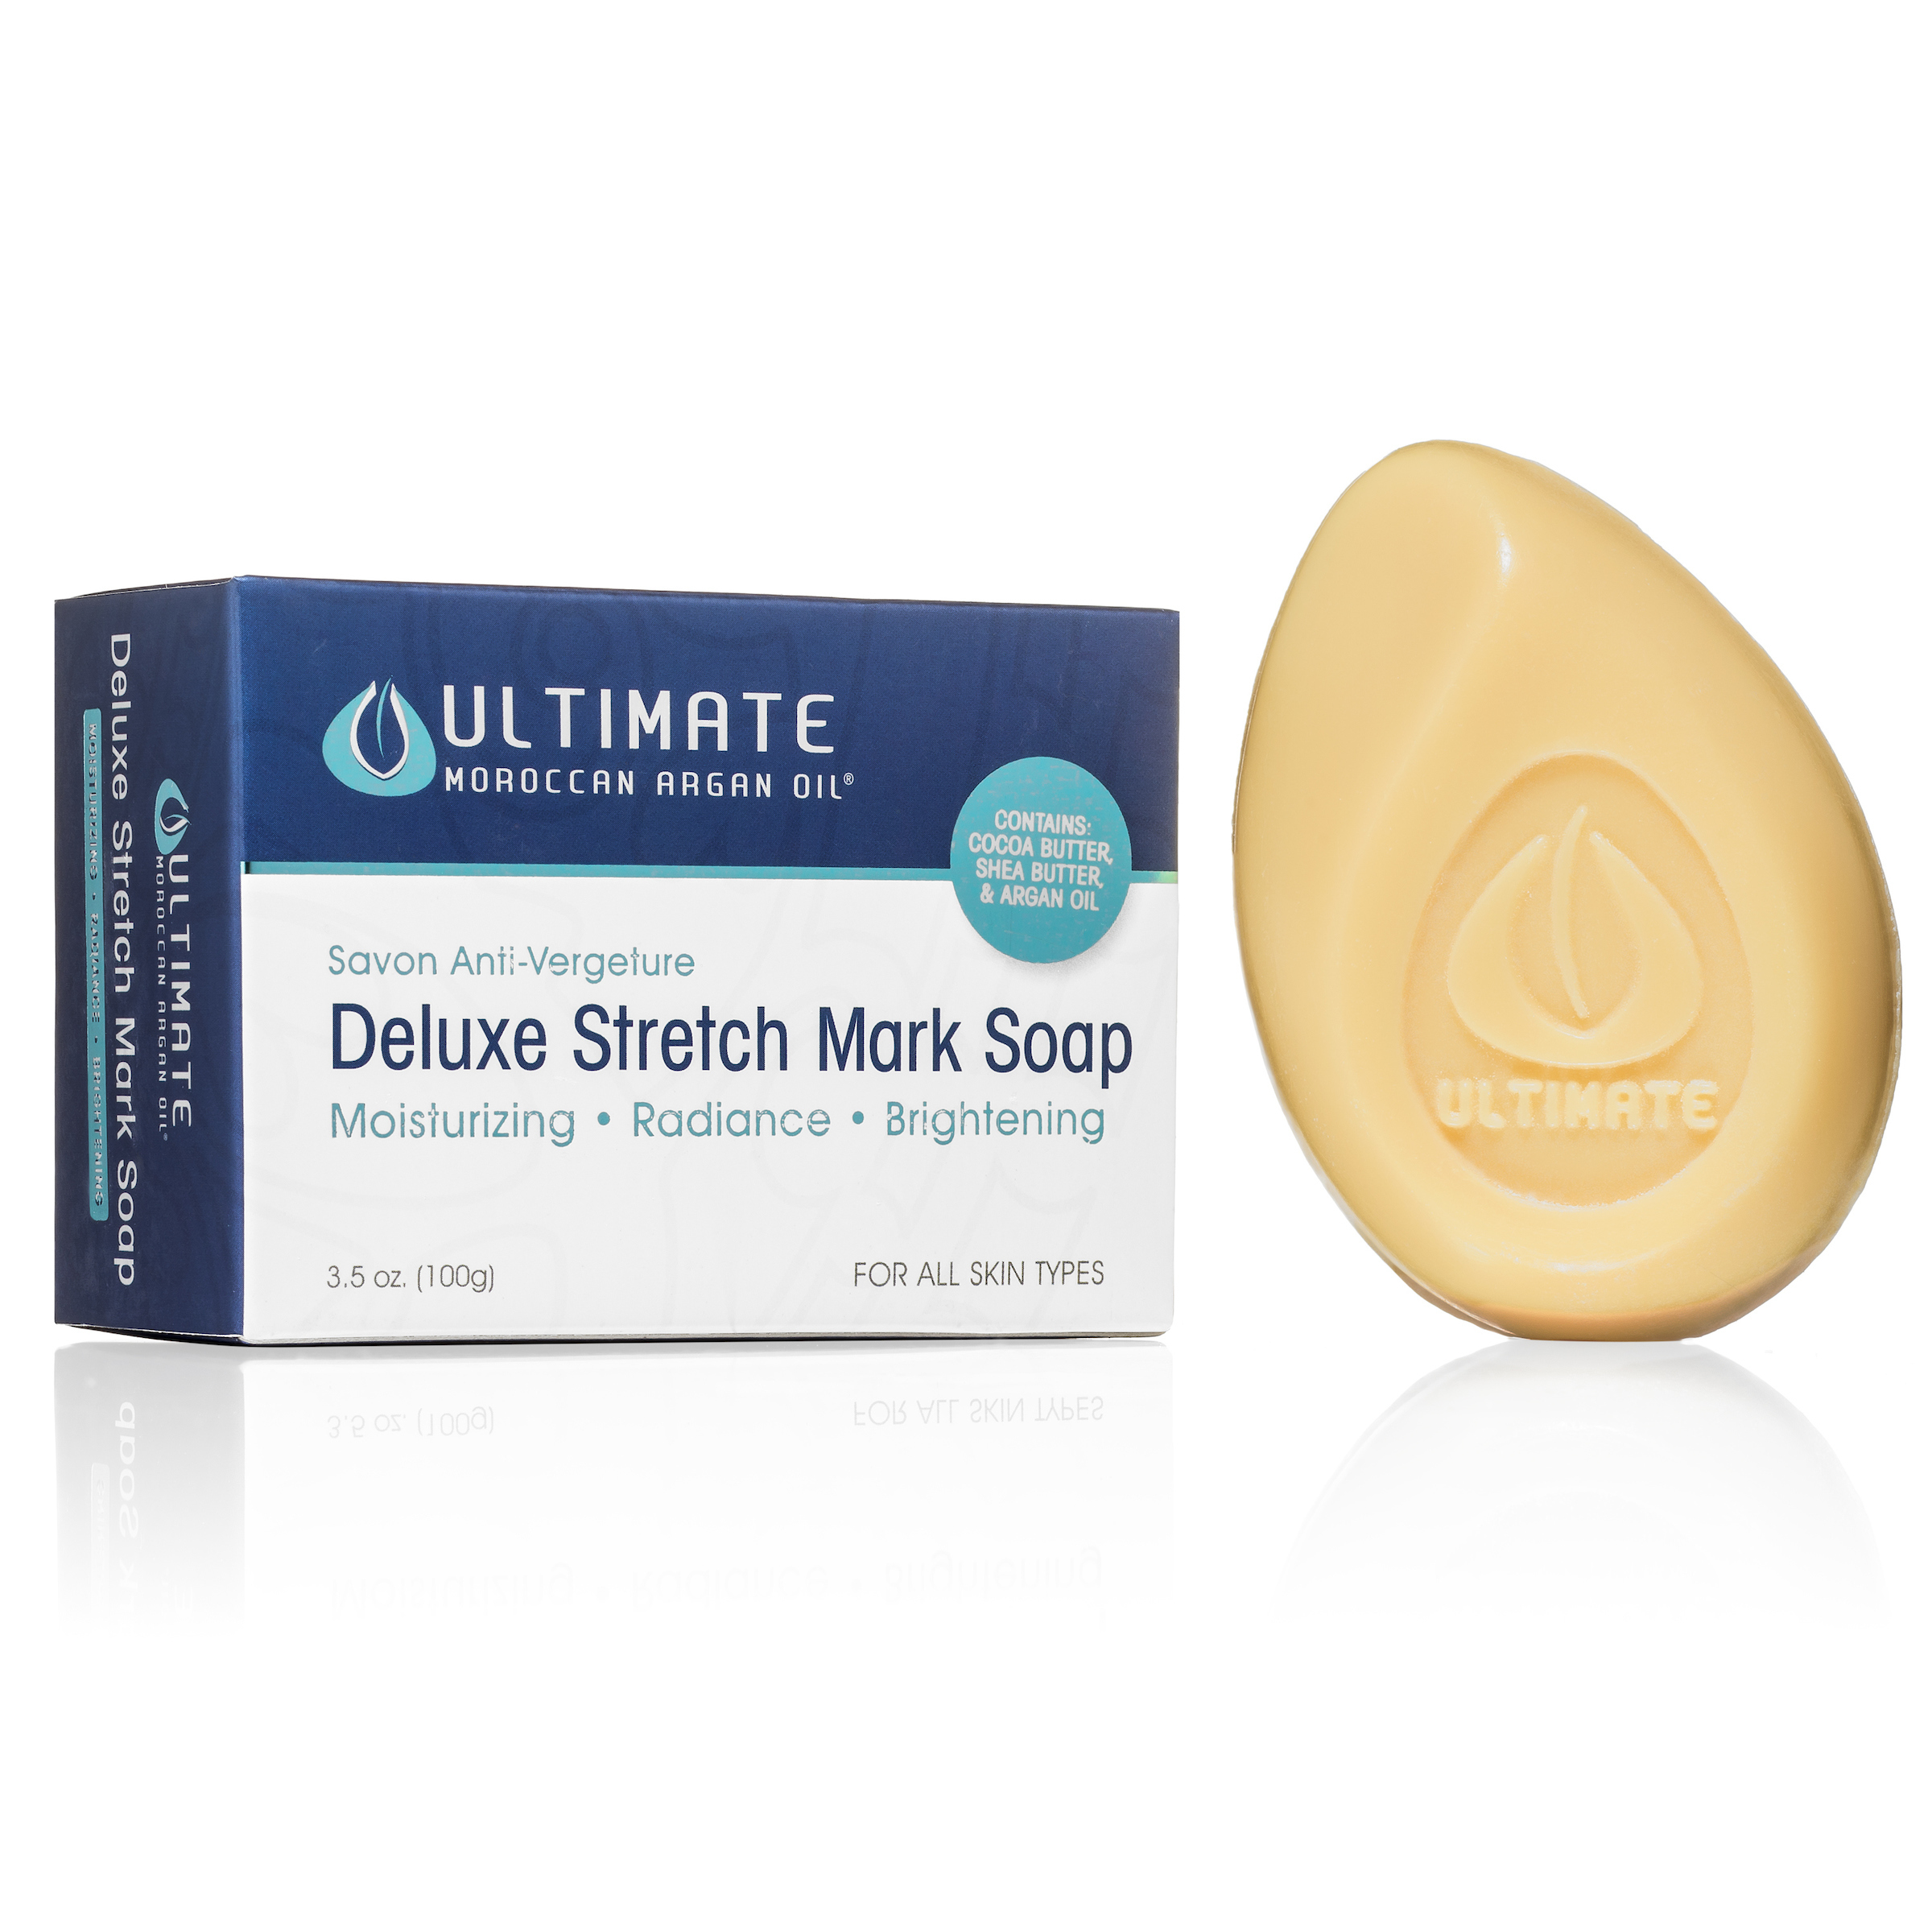 ULTIMATE Morrocan Argan Oil Deluxe Stretch Mark Soap